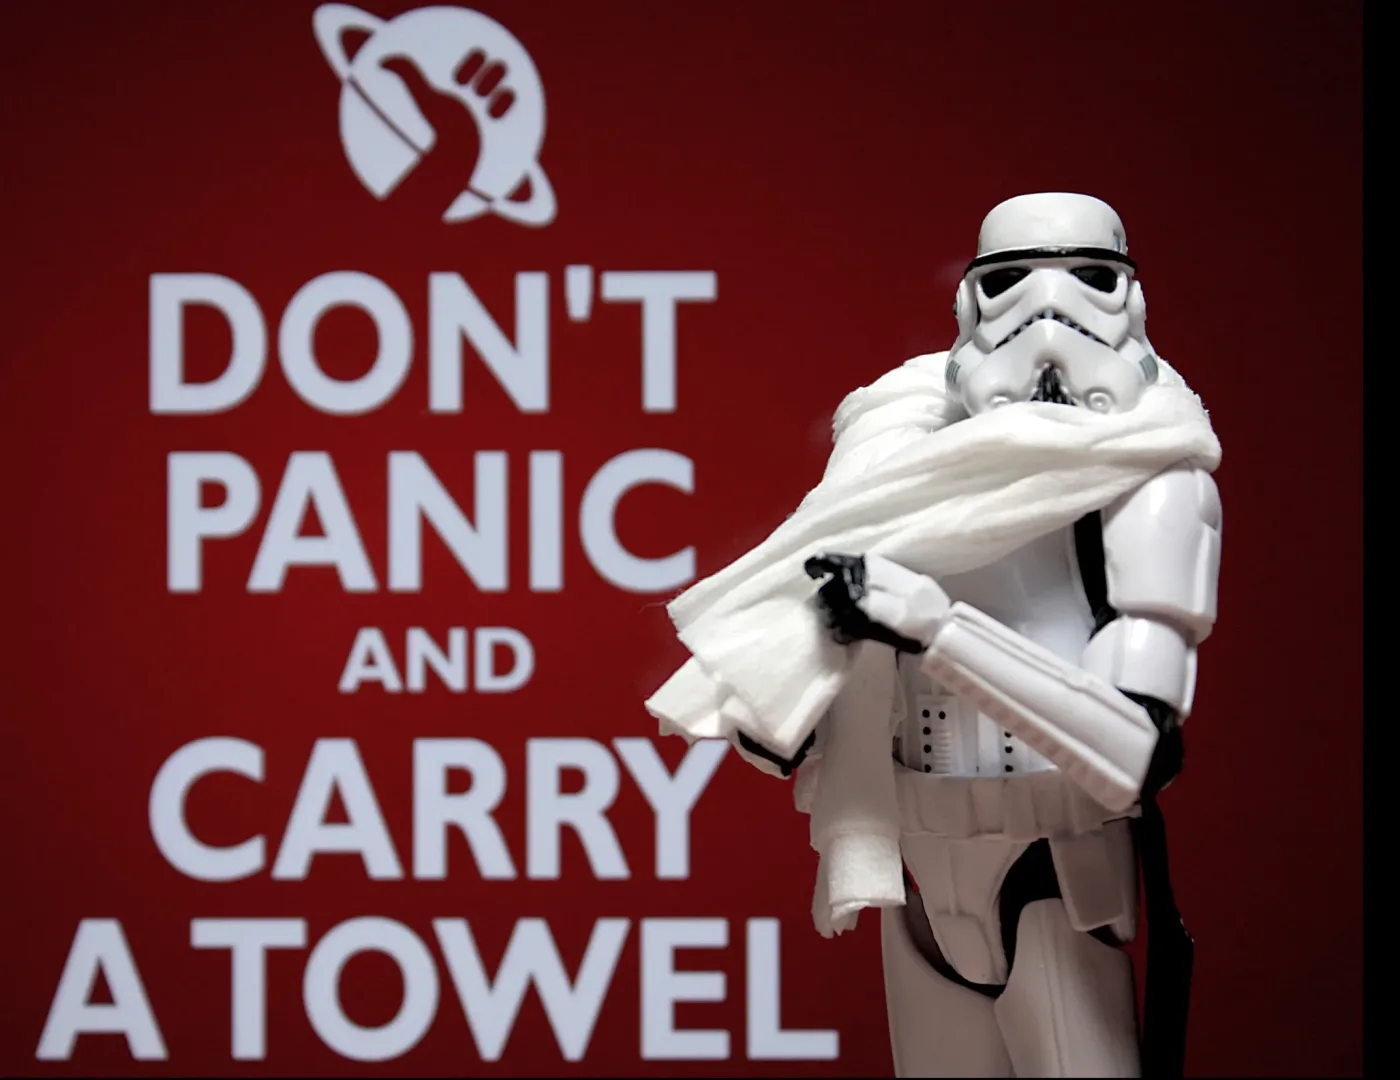 Happy Towel Day dont panic use a towel